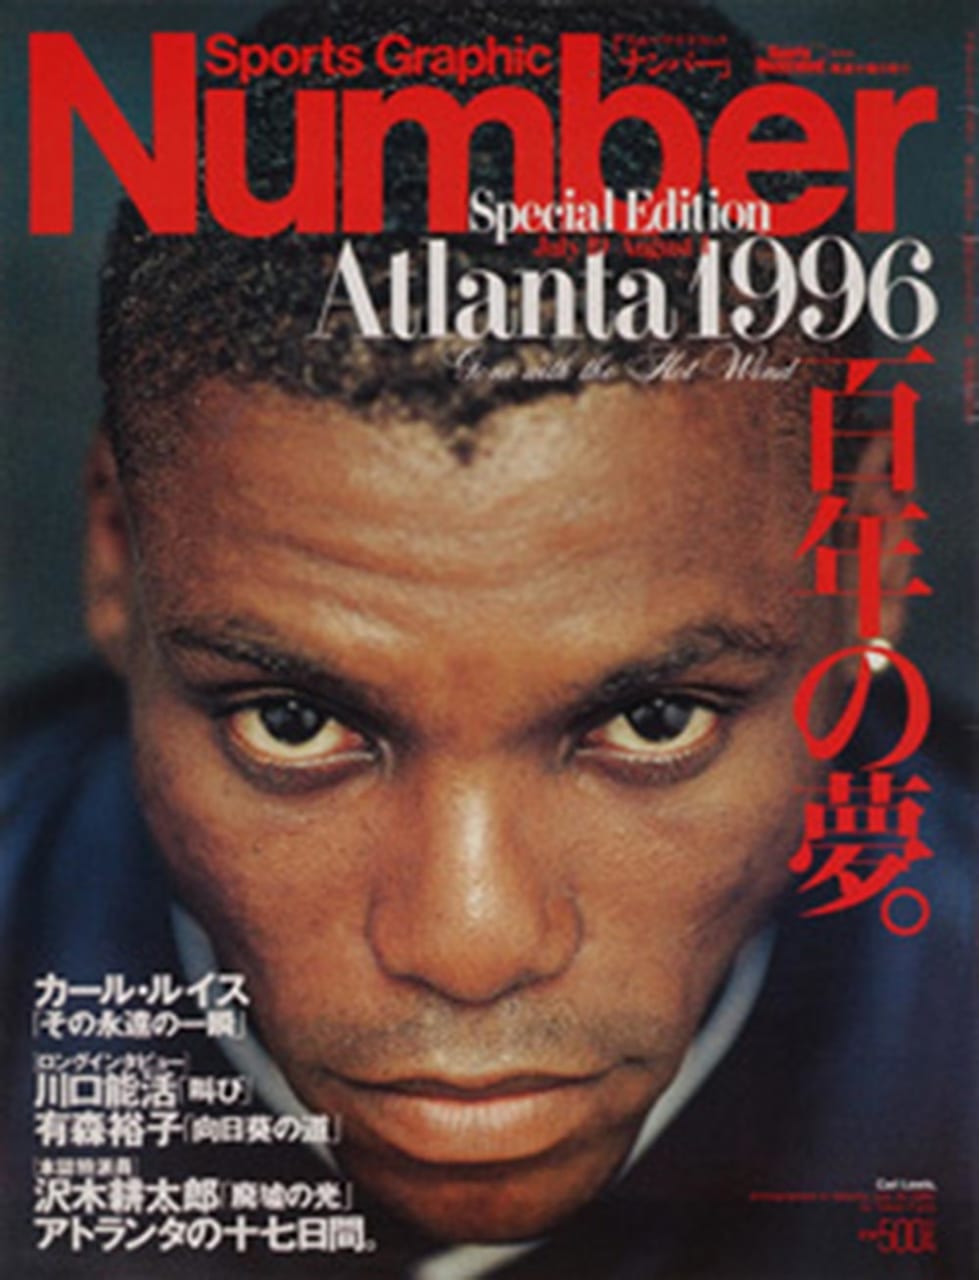 Sports Graphic Number
Special Edition Atlanta 1996
1996年8月9日発売
表紙撮影：藤田孝夫